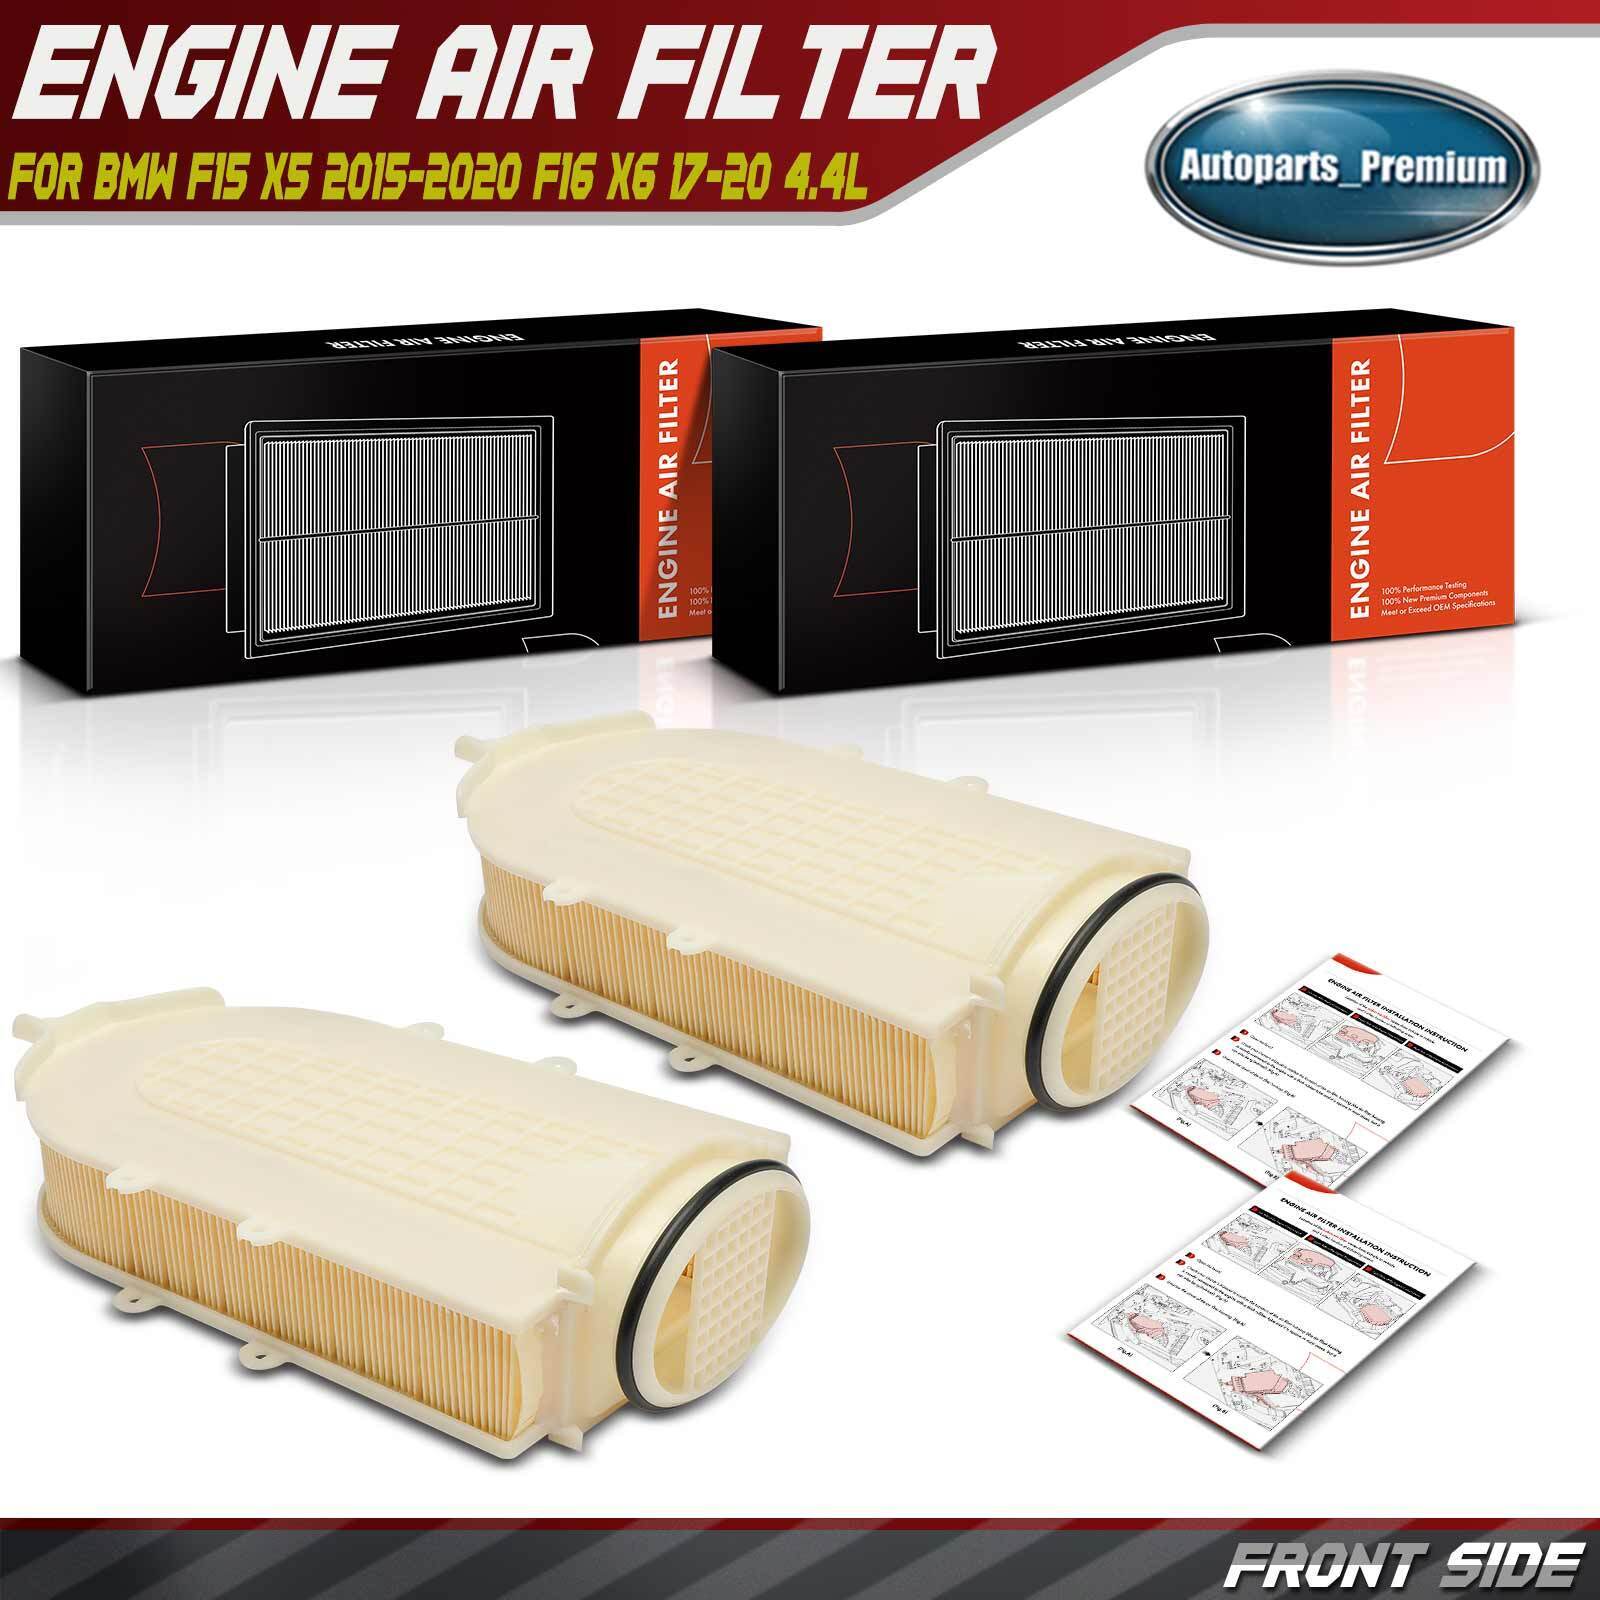 2x Left Engine Air Filter for BMW X5 2015-2020 F16 X6 17-20 V8 4.4L 13717638566